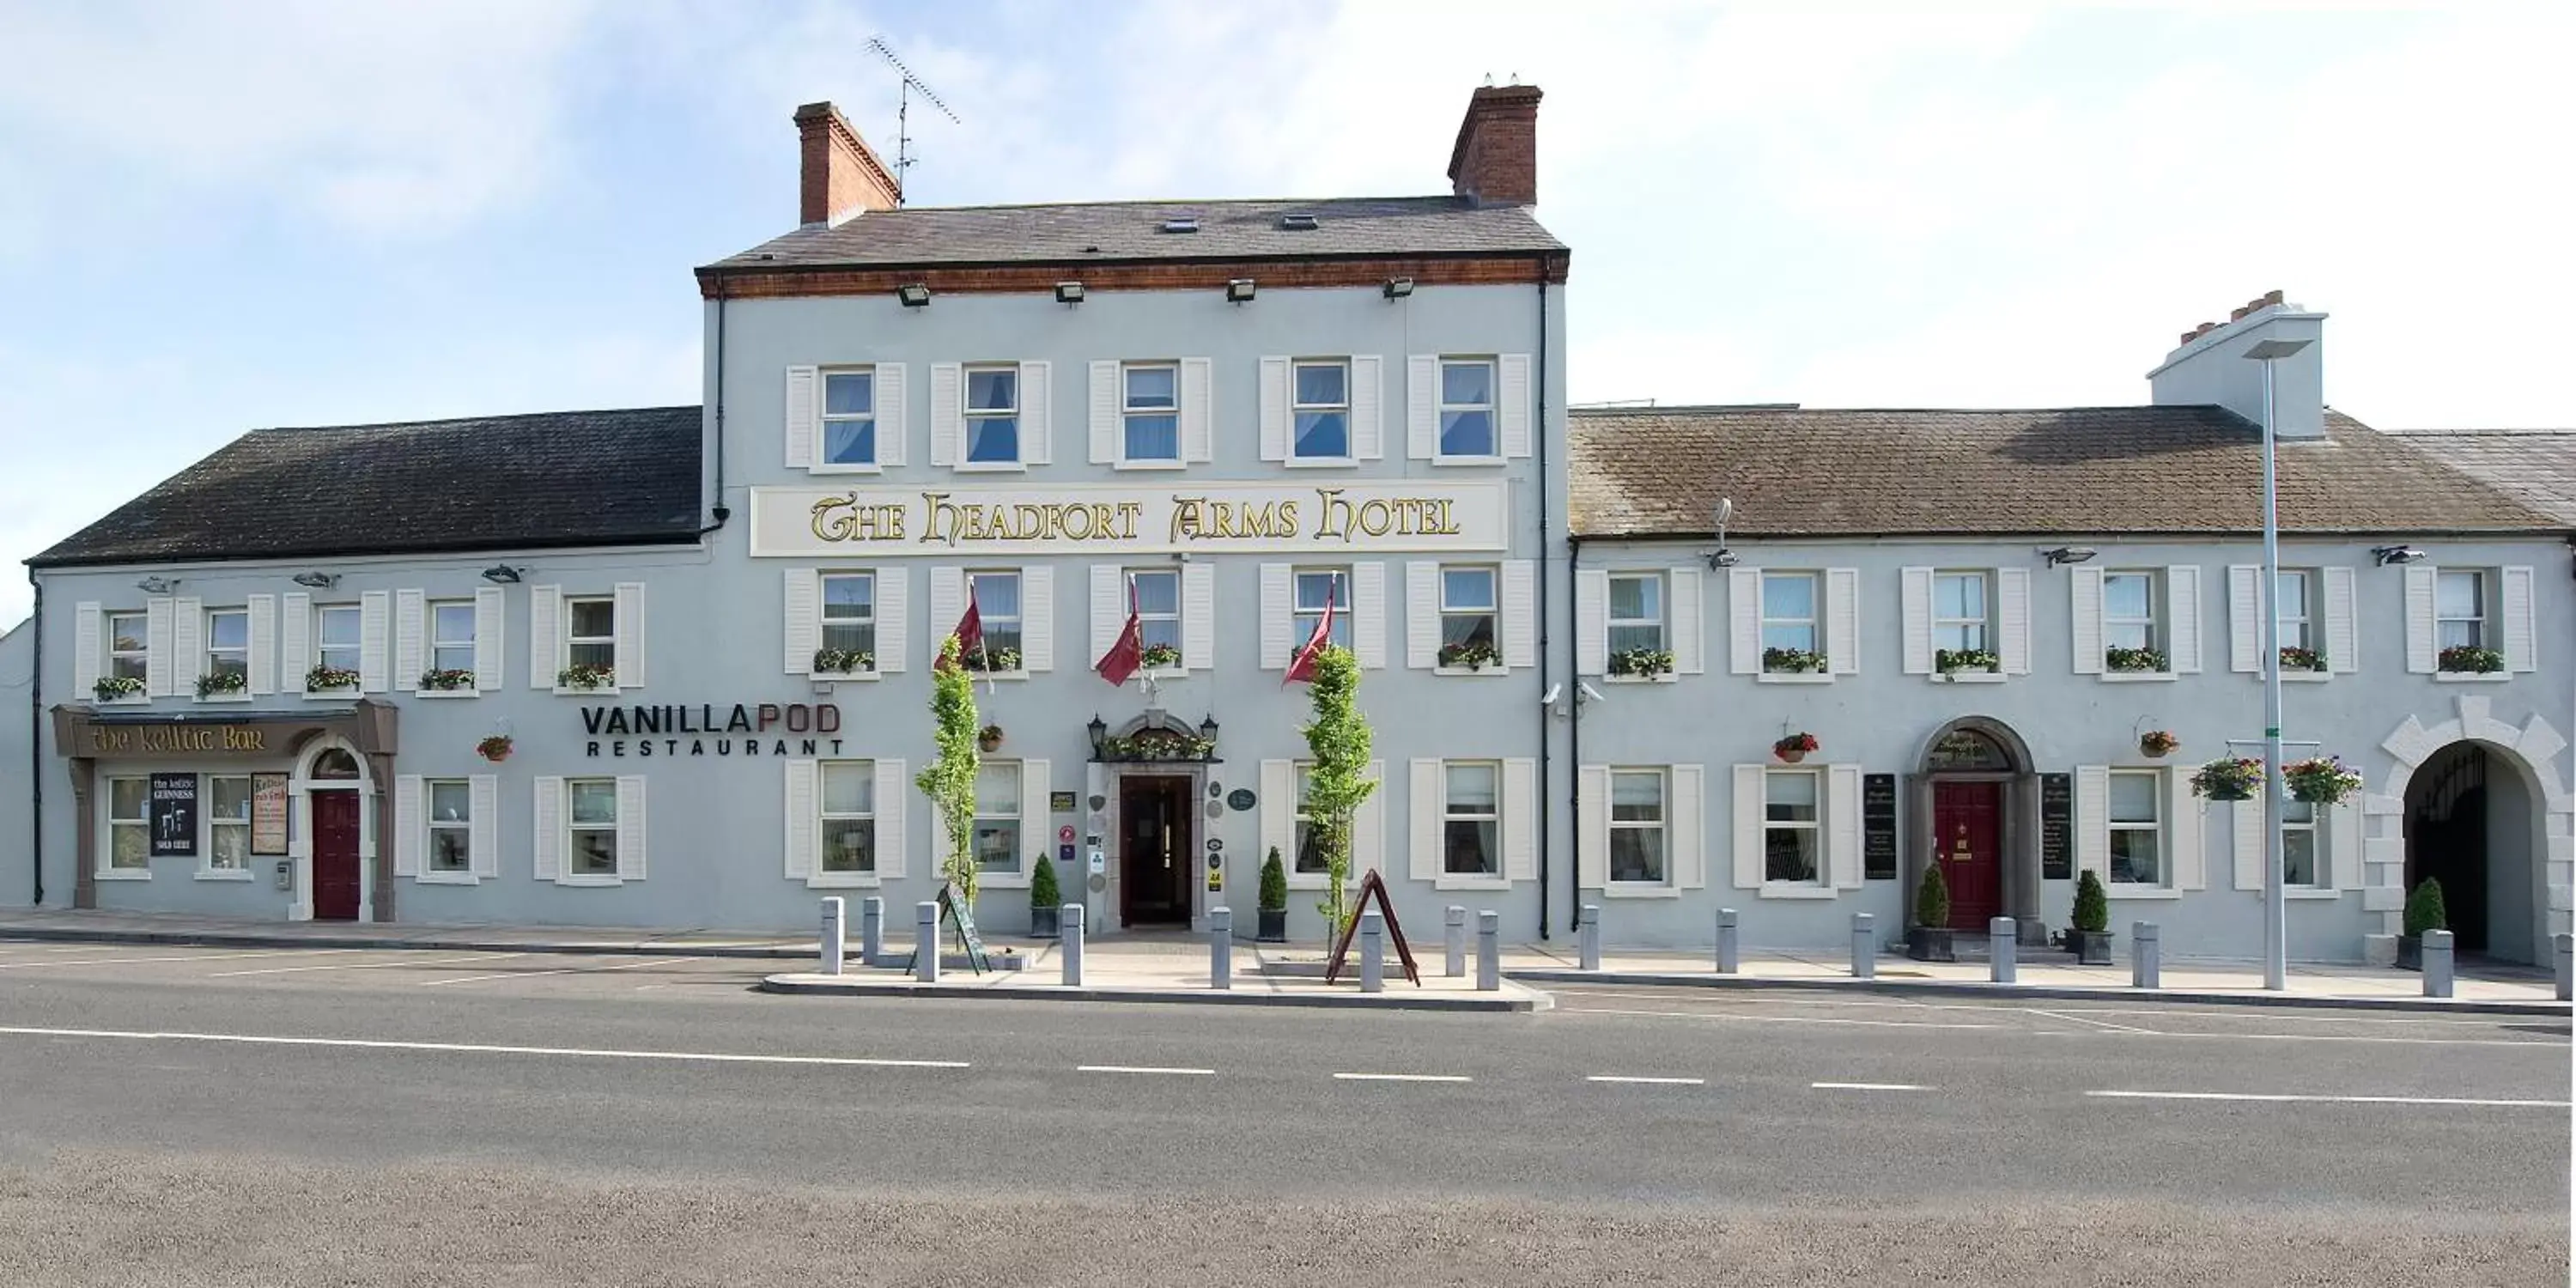 Property building in Headfort Arms Hotel